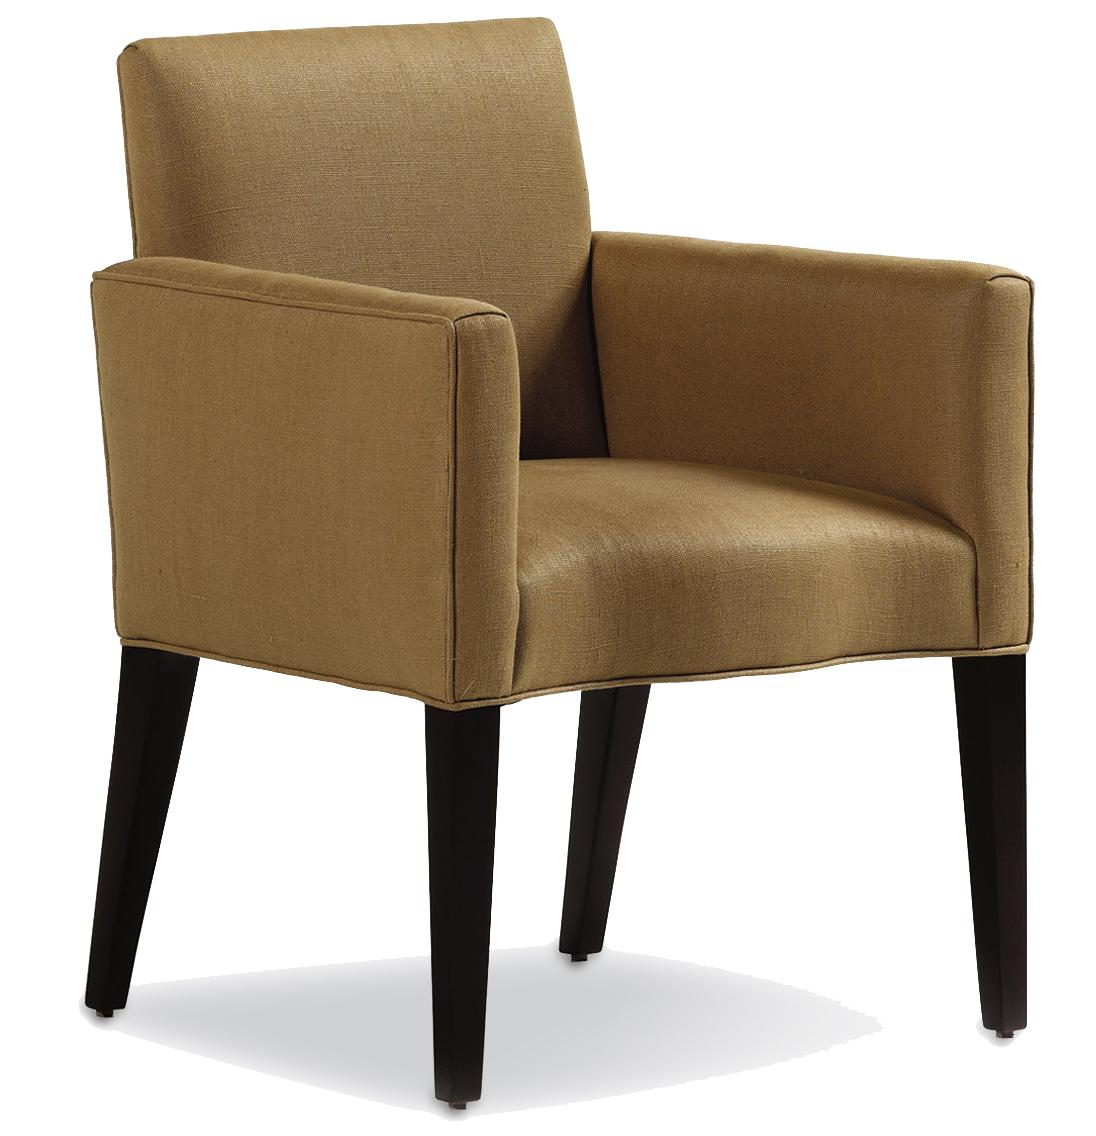 Marr Dining Arm Chair   